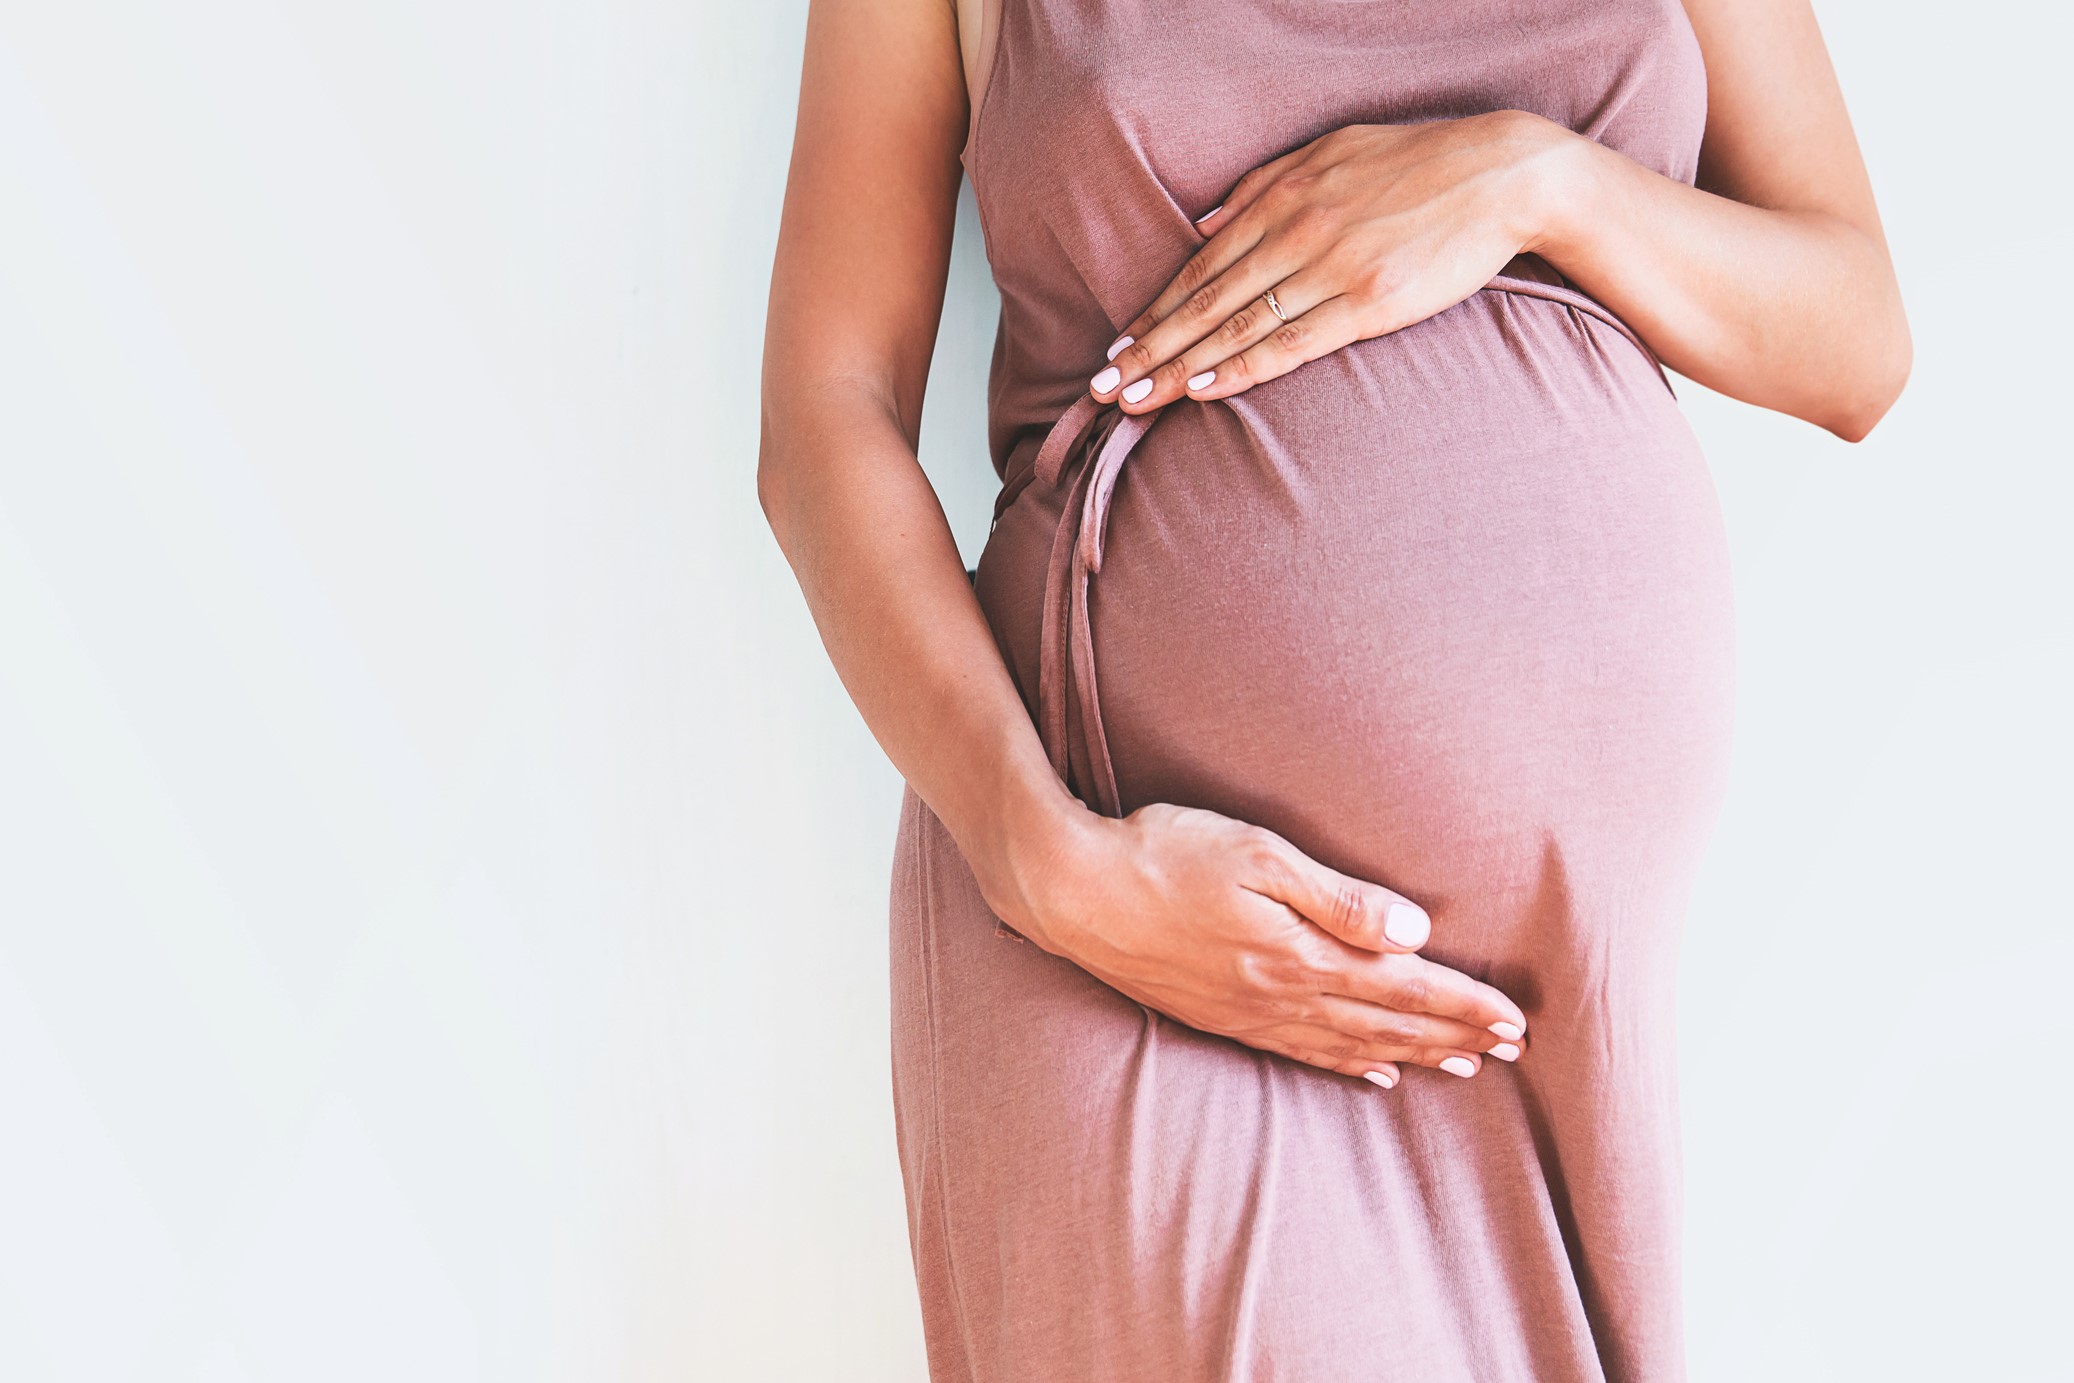 Can You Take Buspirone While Pregnant?